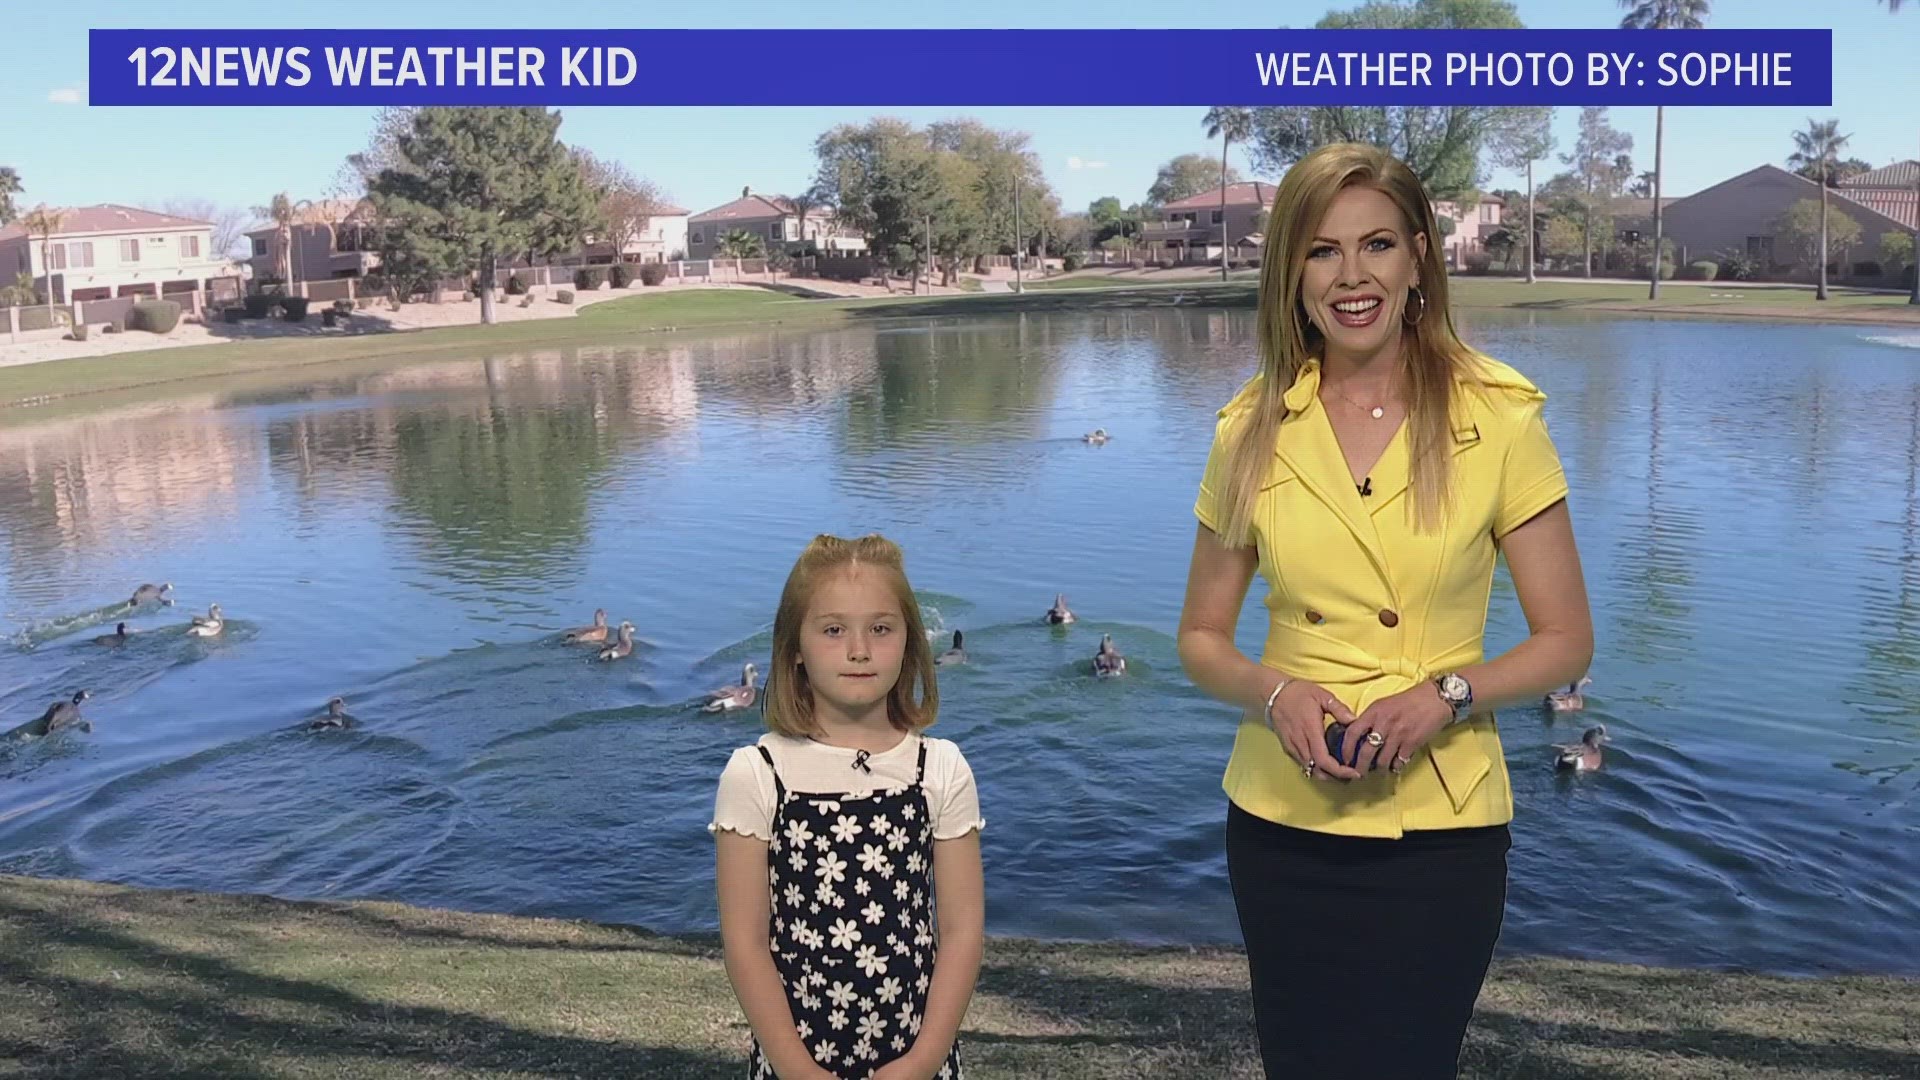 Thank you, Sophie, for joining us in studio to discuss the weather!